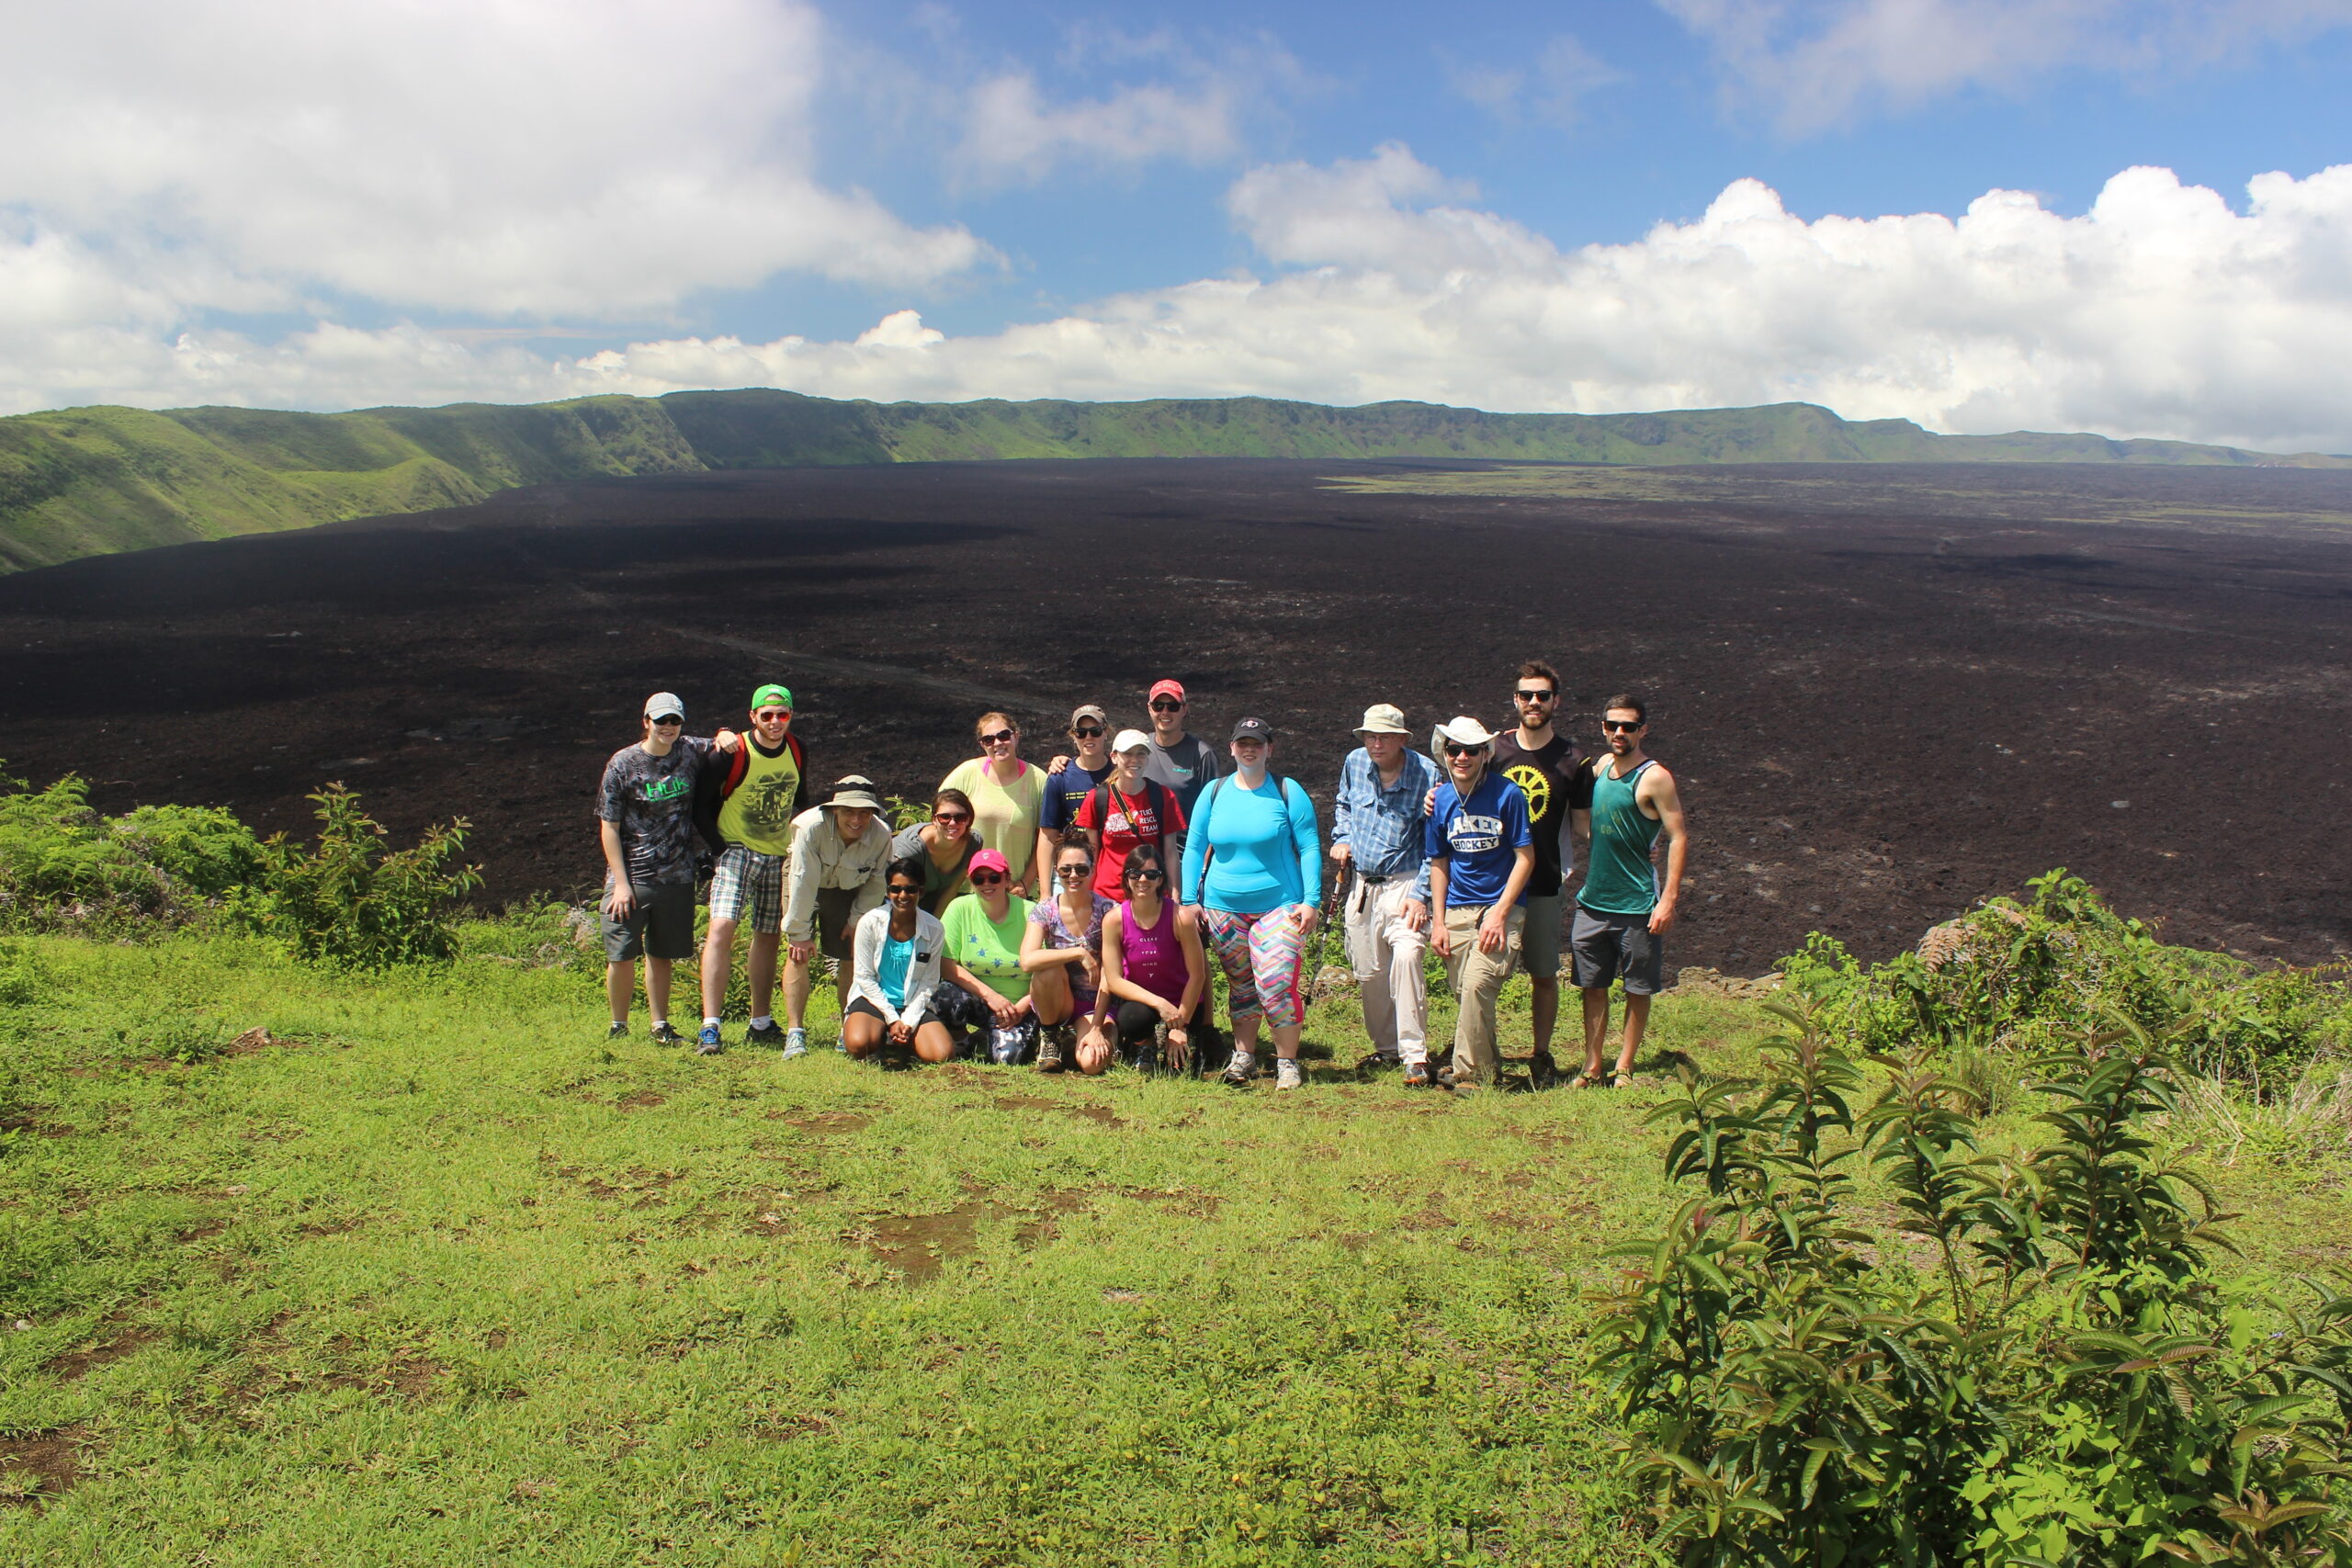 Gregory Lewbart (third from left in khaki hat) with CVM students in the Galápagos in 2018.